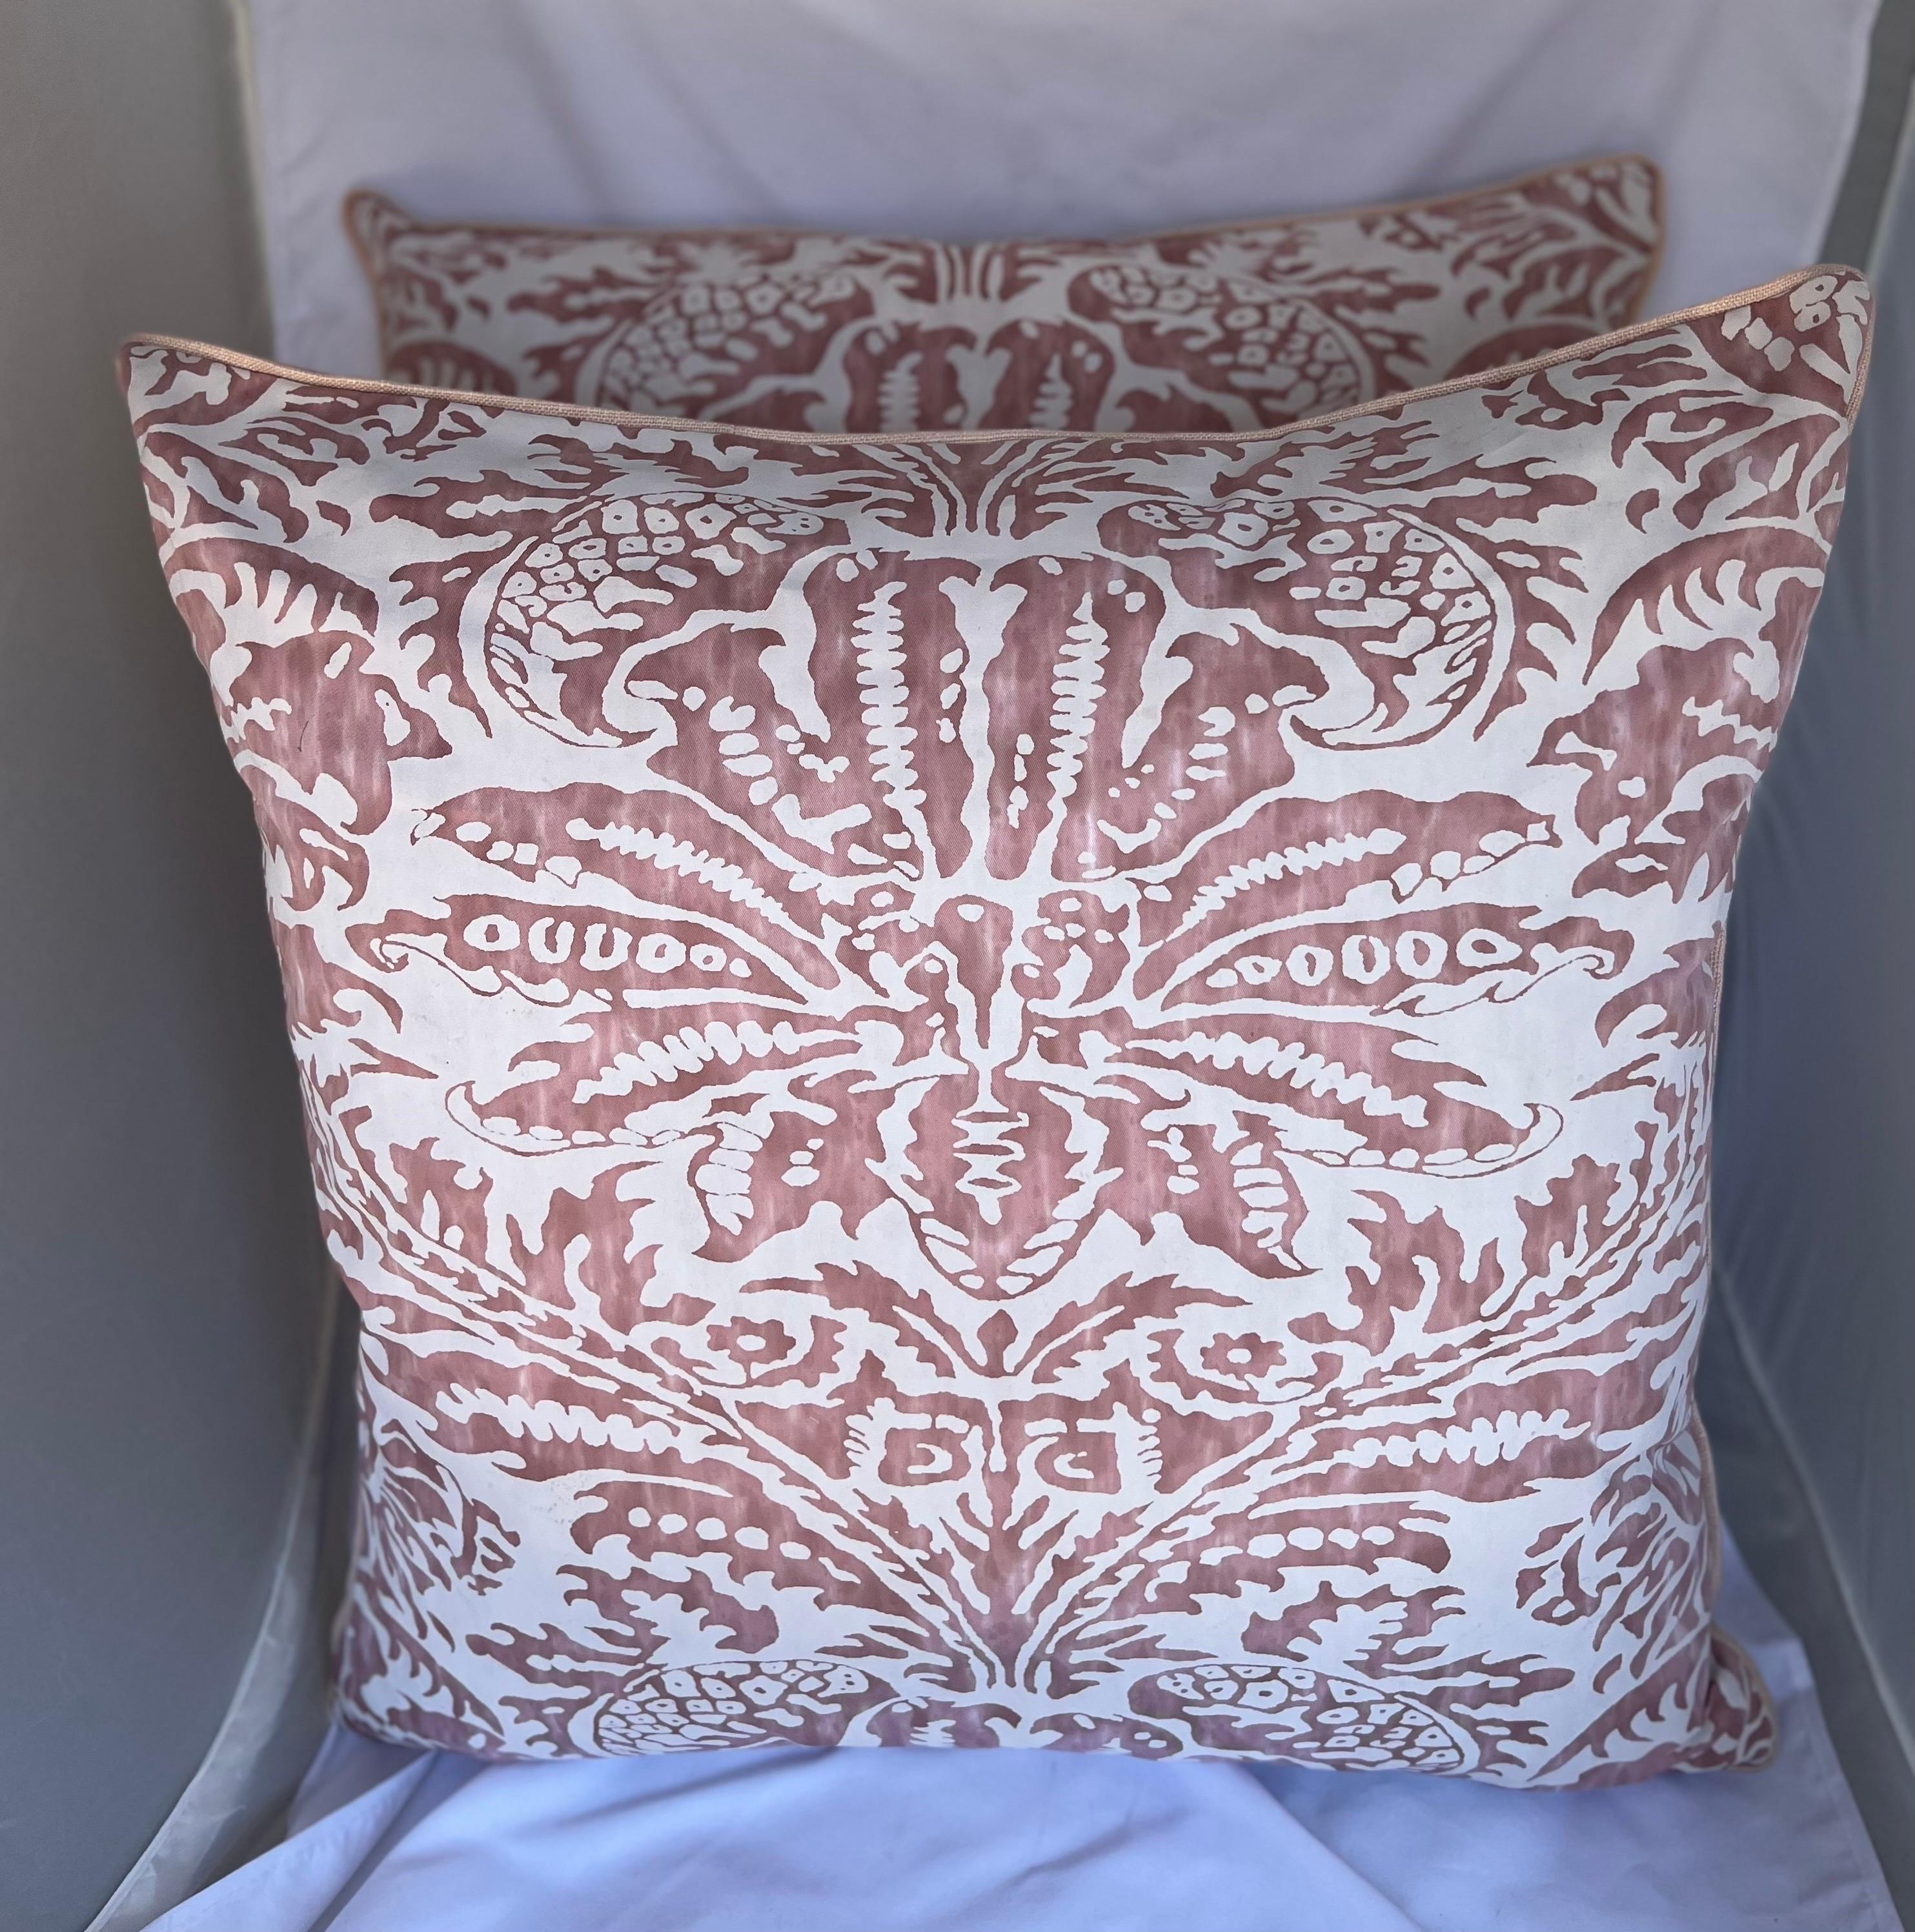 Rococo Pink & White Glicine Fortuny Patterned Textile Pillow For Sale